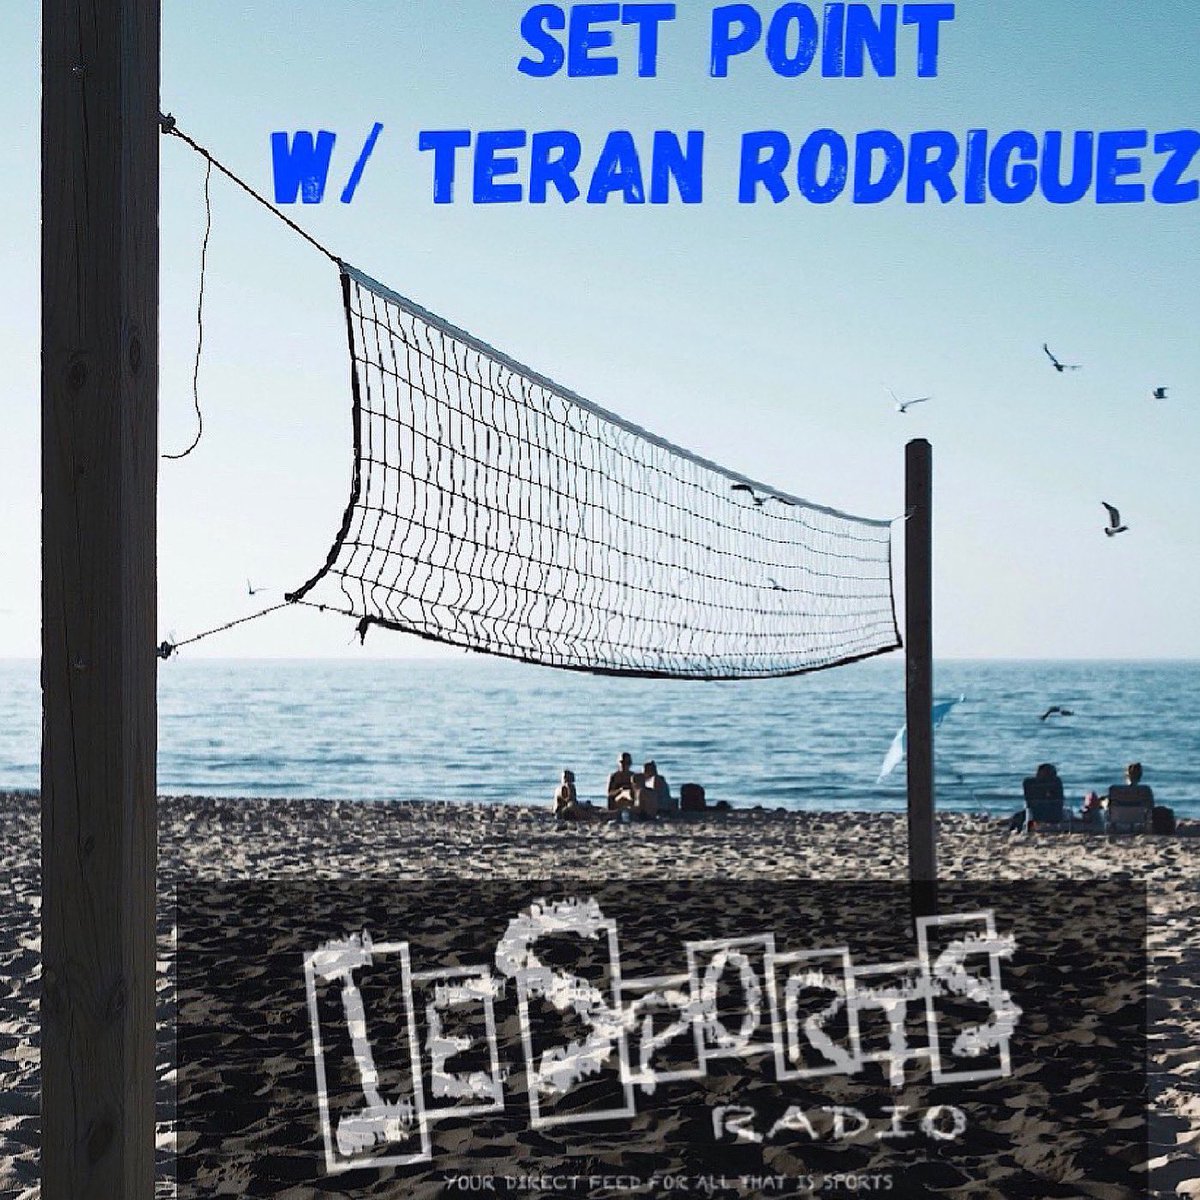 Next Up: THU 9/30 2pm PST/5pm EST #SetPoint with @TeranRodriguez1 
#NCAAVolleyball #NCAAWVB #B1G #Maryland #PennState #Pac12 #UCLA #Colorado #Utah #WashingtonState #SEC #MississippiState #CSUB #TwoYearAnniversary #SendYourQuestions
@Set_PointIE
spreaker.com/show/set-point